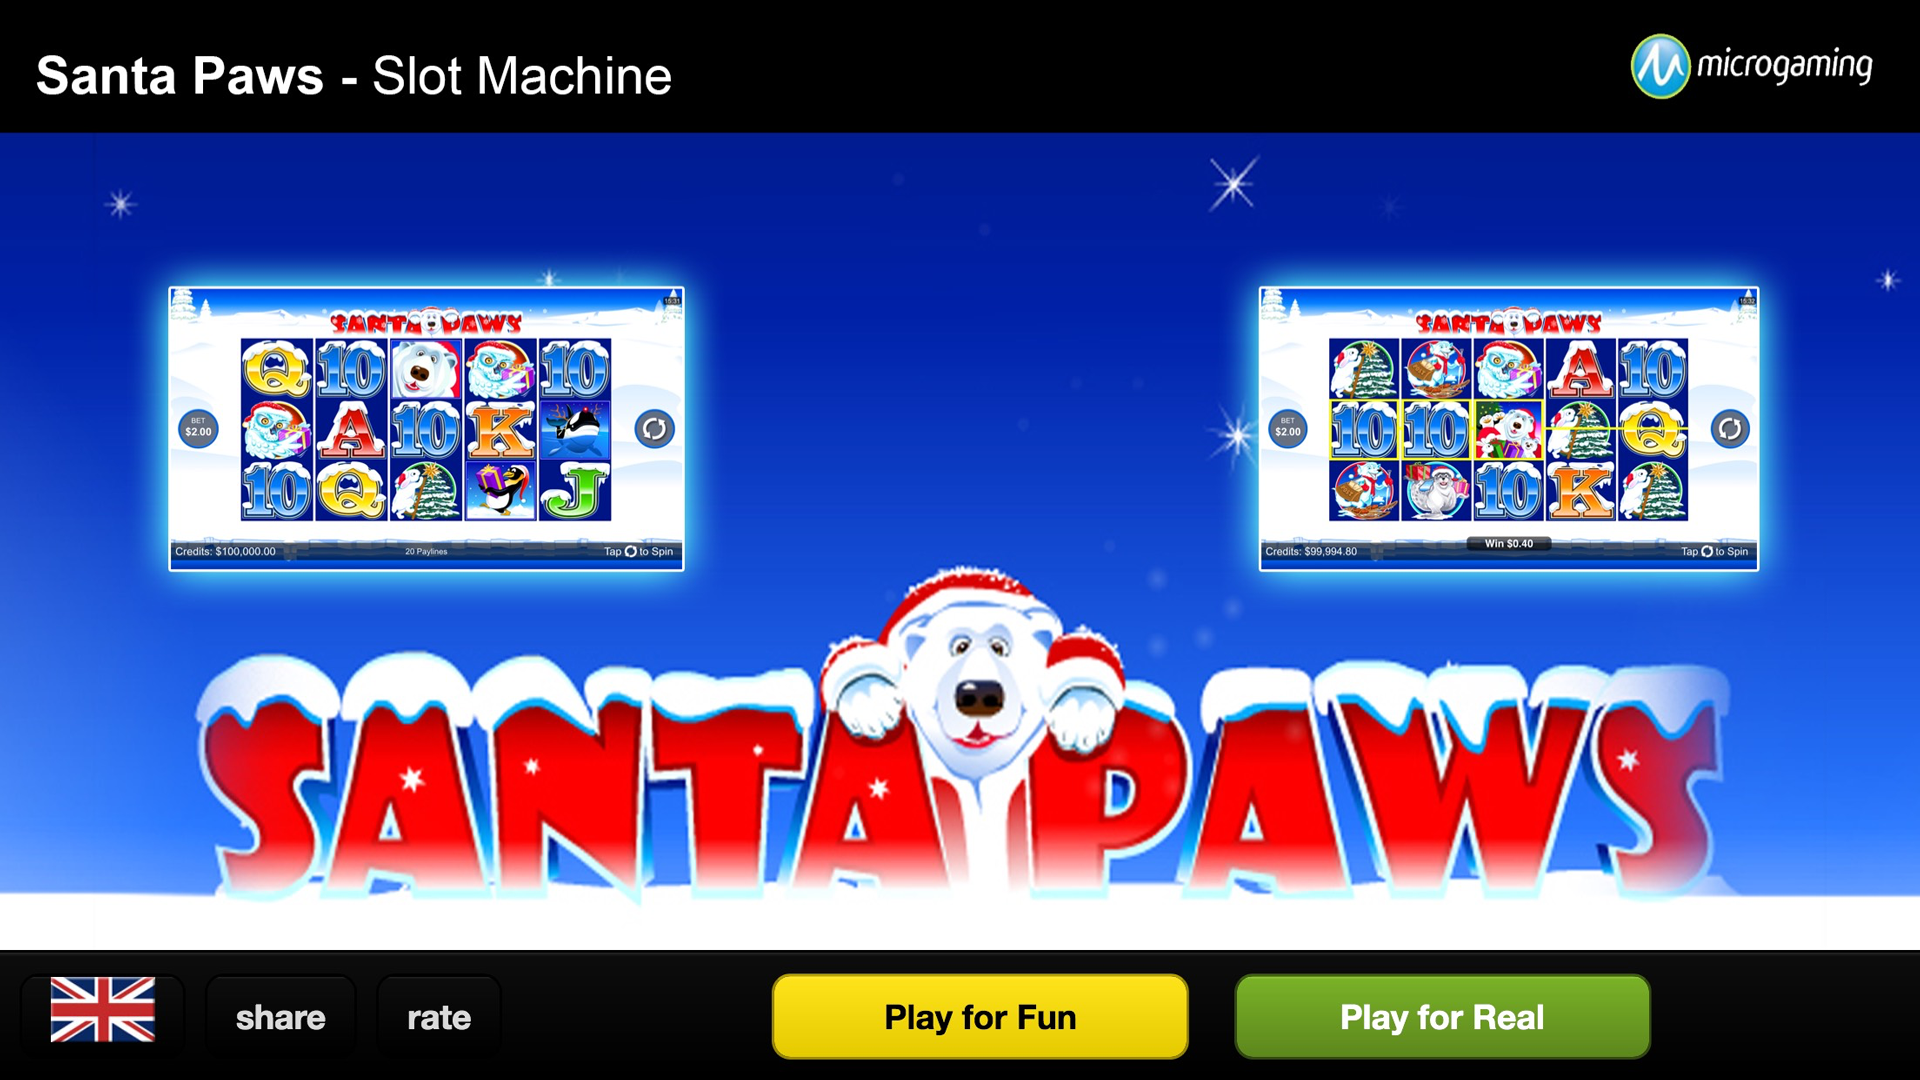 Santa Paws would be translated to 